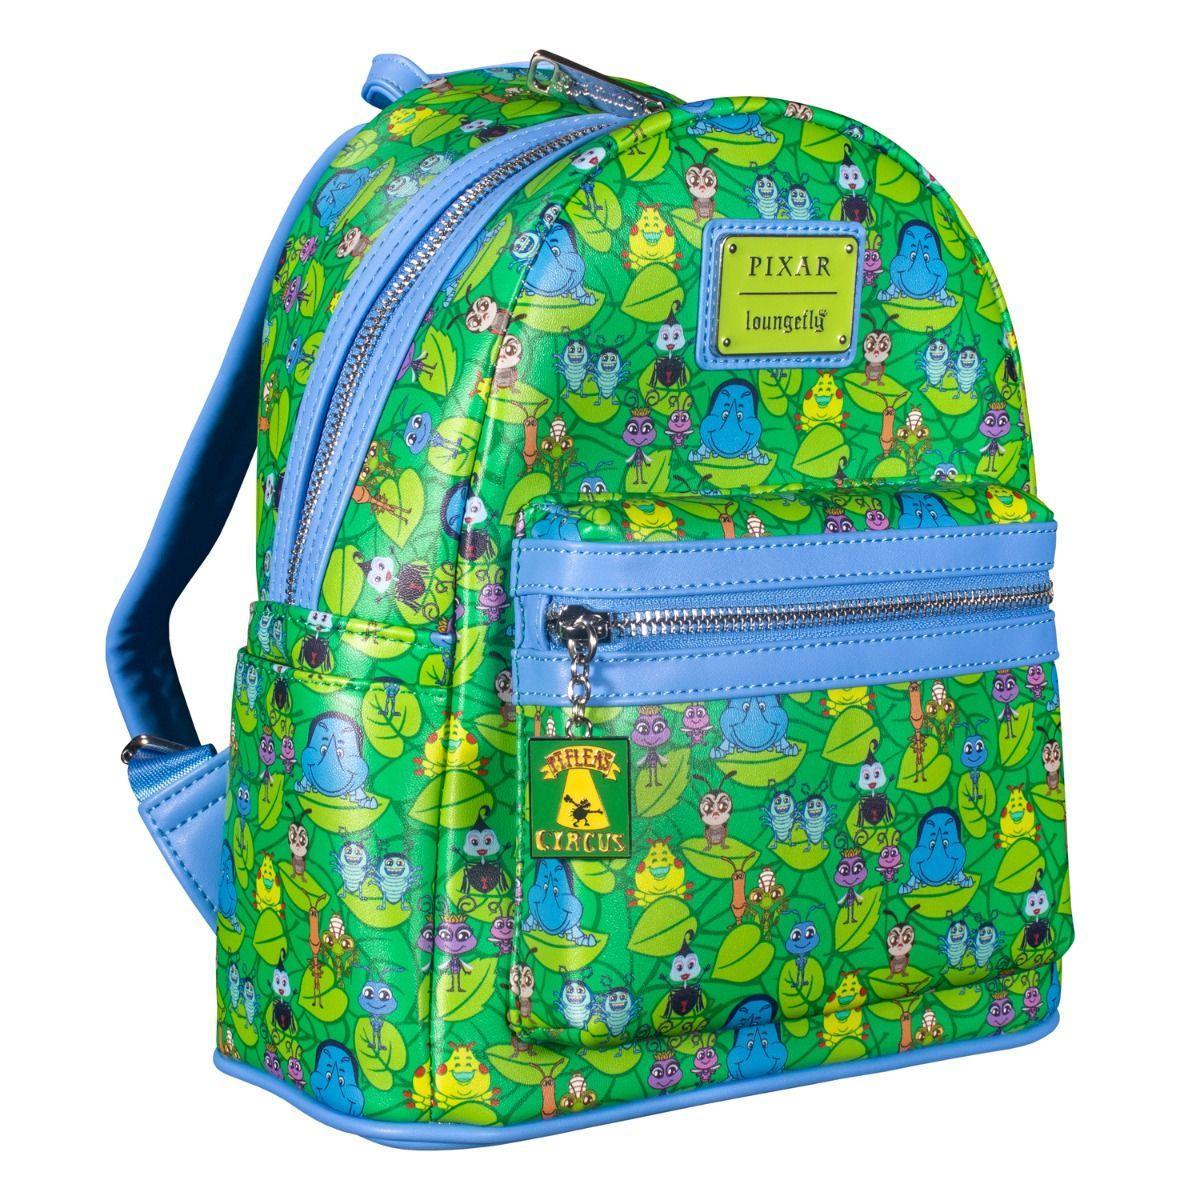 LOUWDBK2355 A Bug's Life - Collage Backpack - Loungefly - Titan Pop Culture